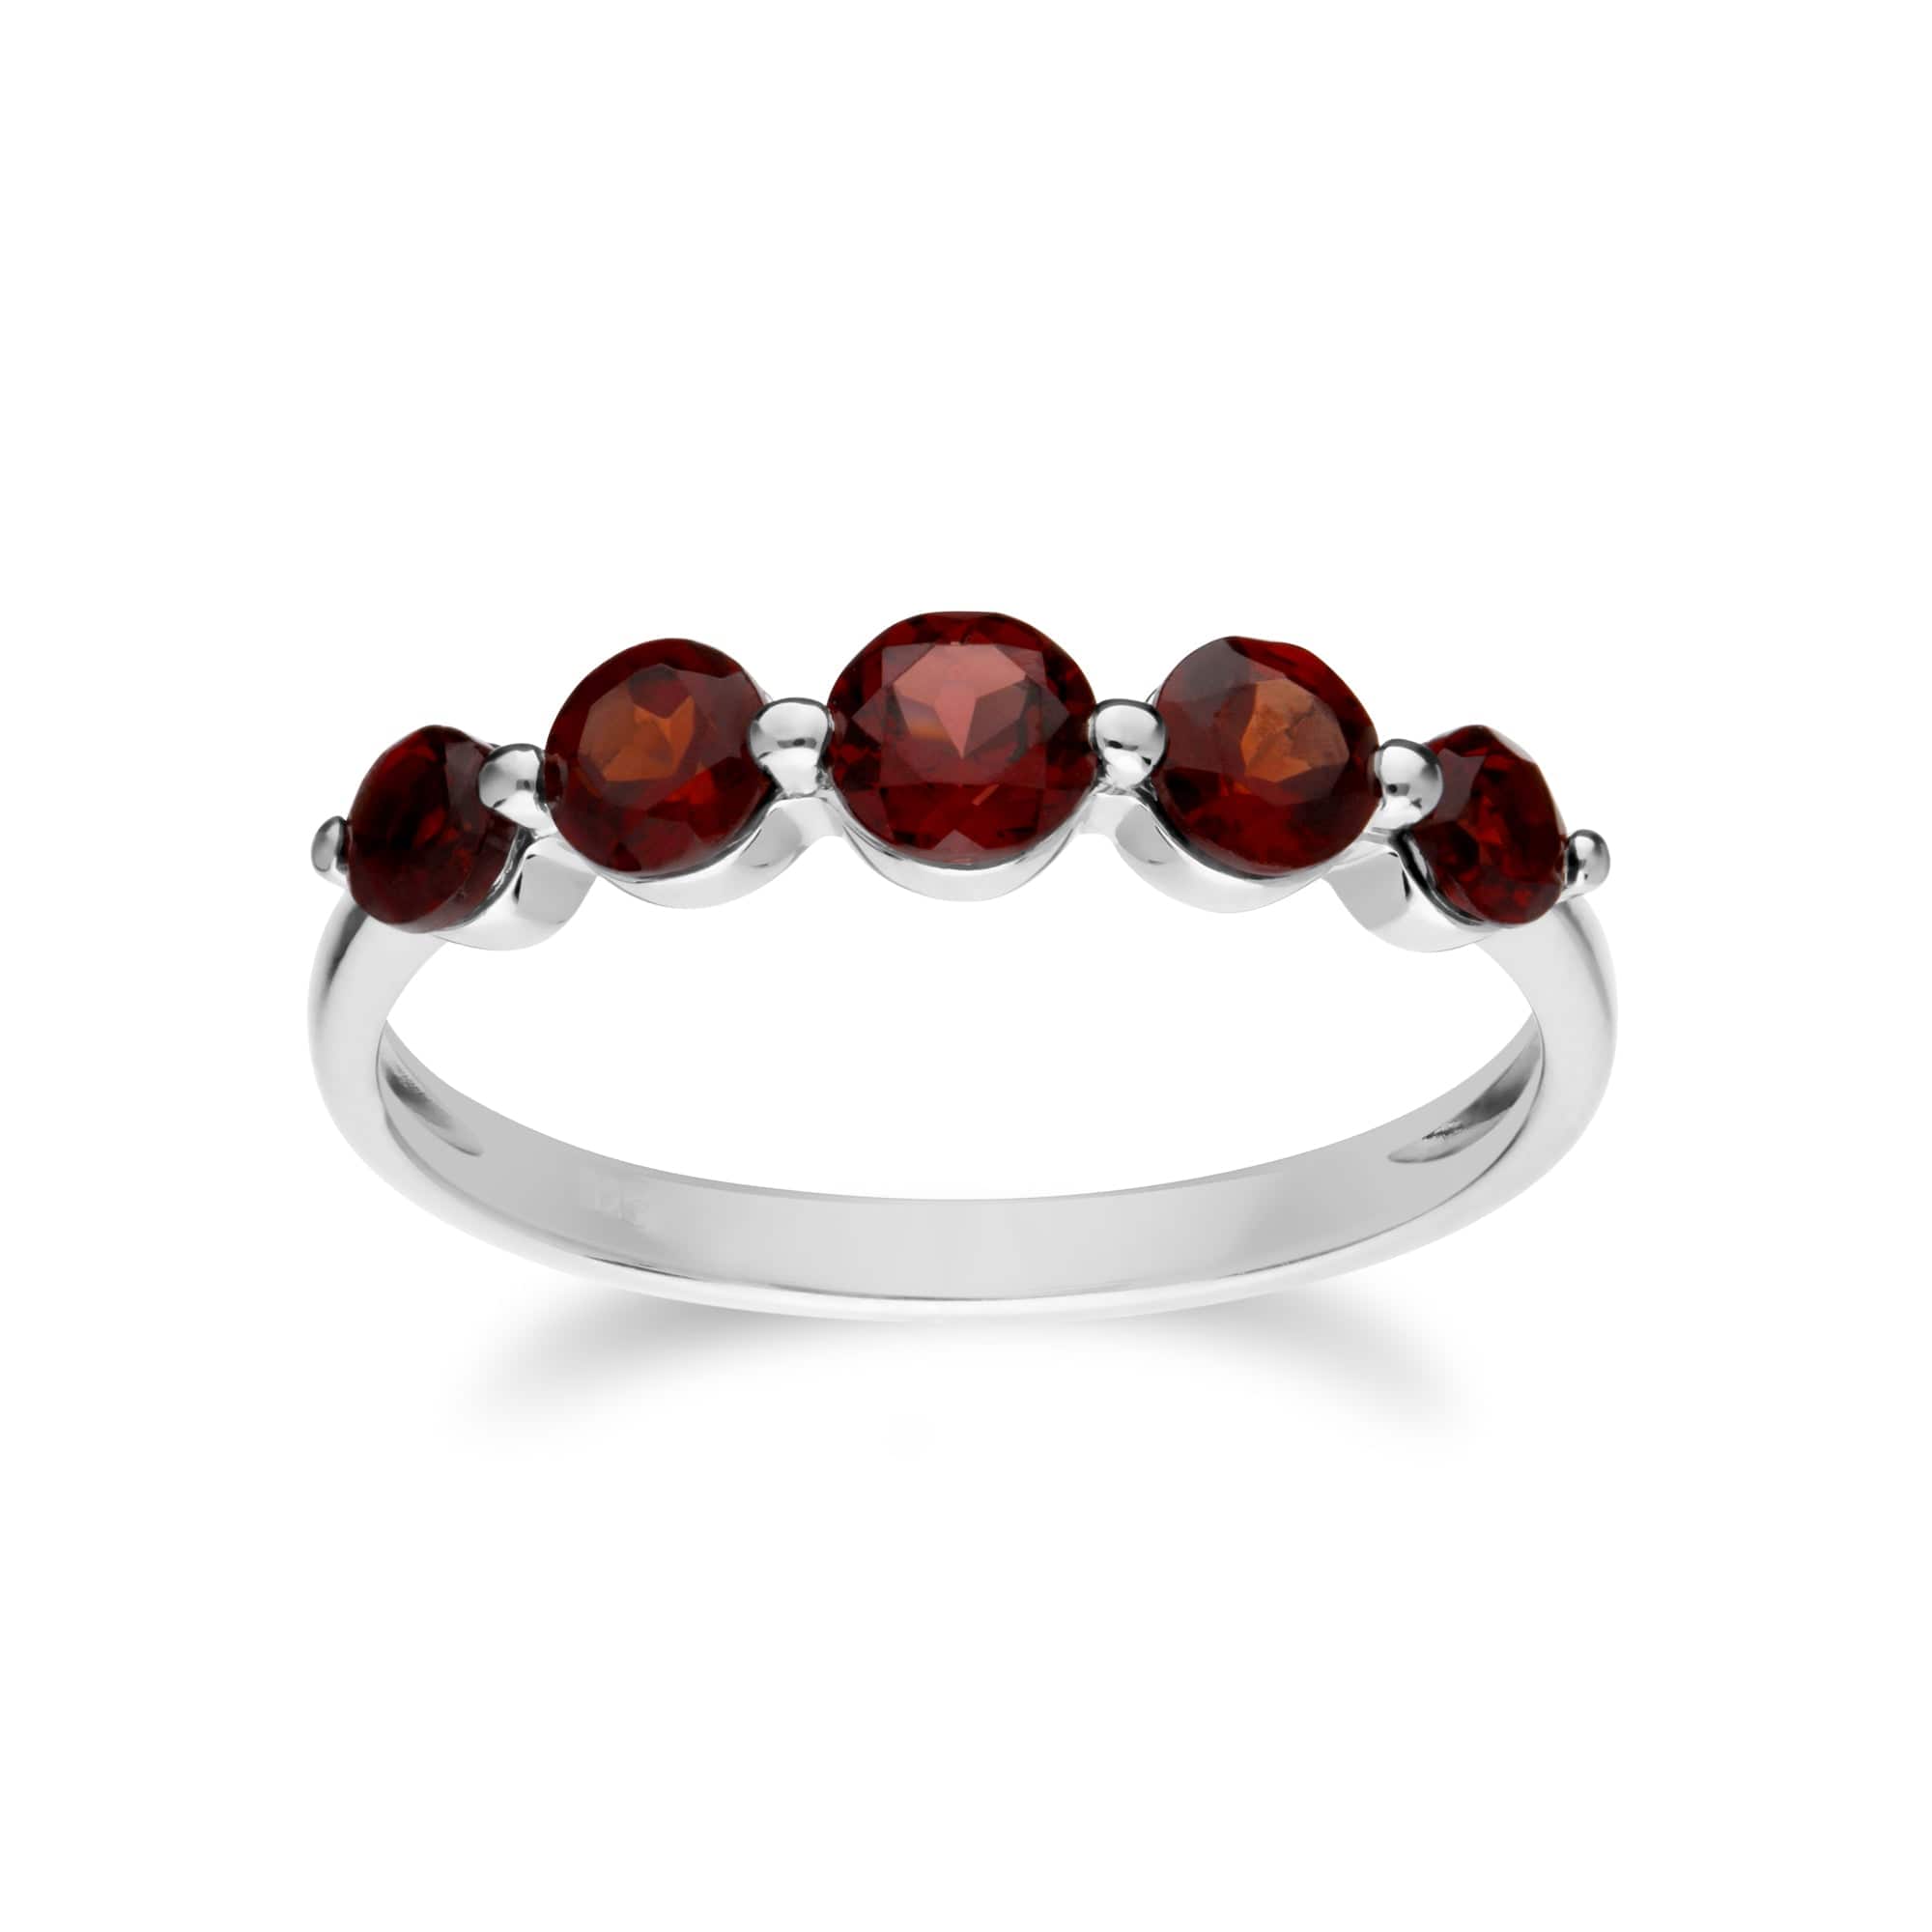 270E025502925-270R055902925 Classic Round Garnet Three Stone Earrings & Five Stone Ring Set in 925 Sterling Silver 3